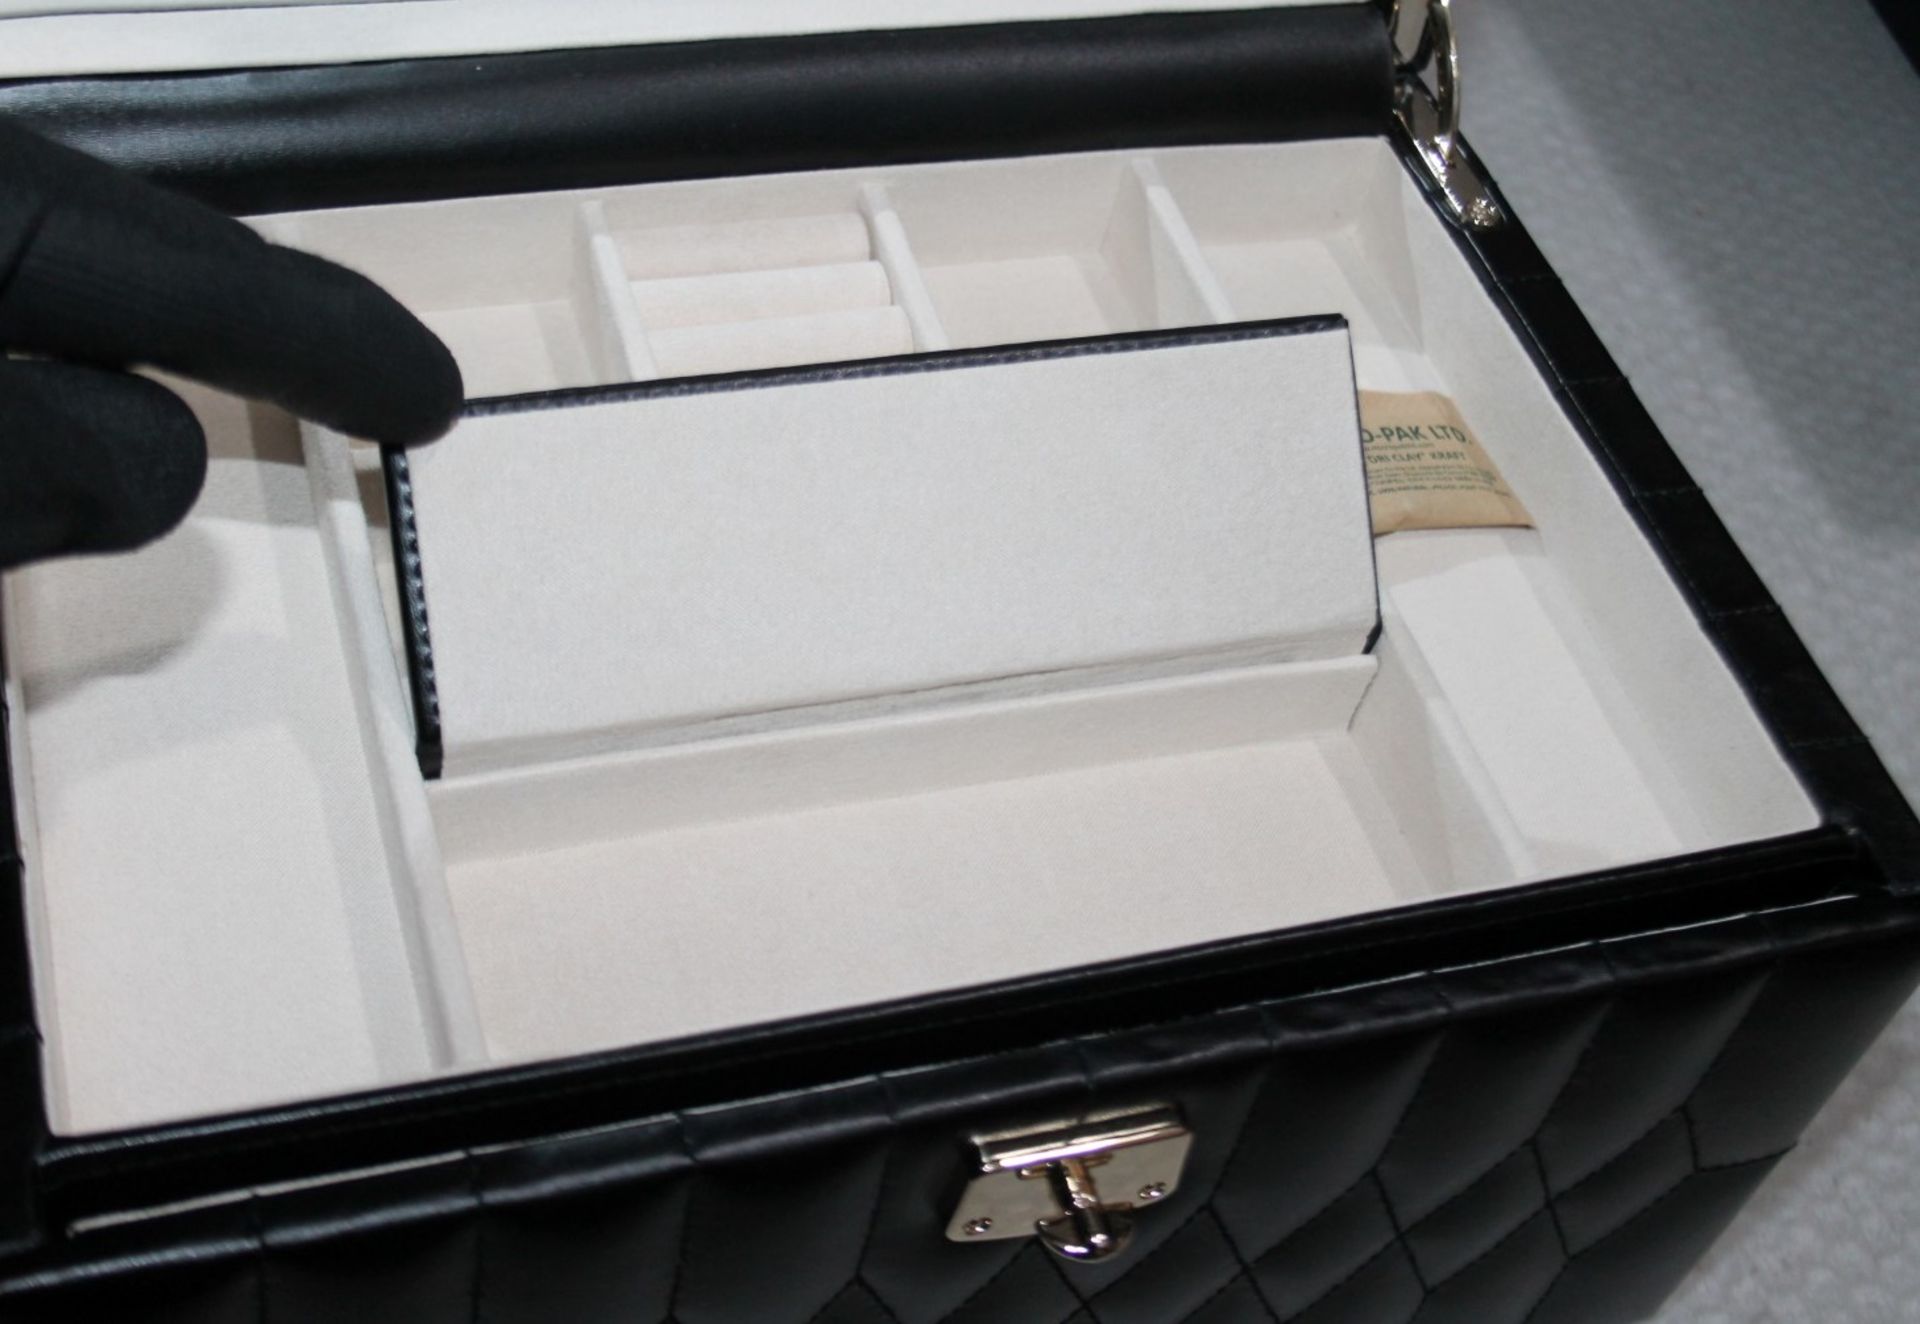 1 x WOLF 'Caroline' Jewellery Box Handcrafted Black Leather, With Travel Case - Original Price £241 - Image 3 of 17